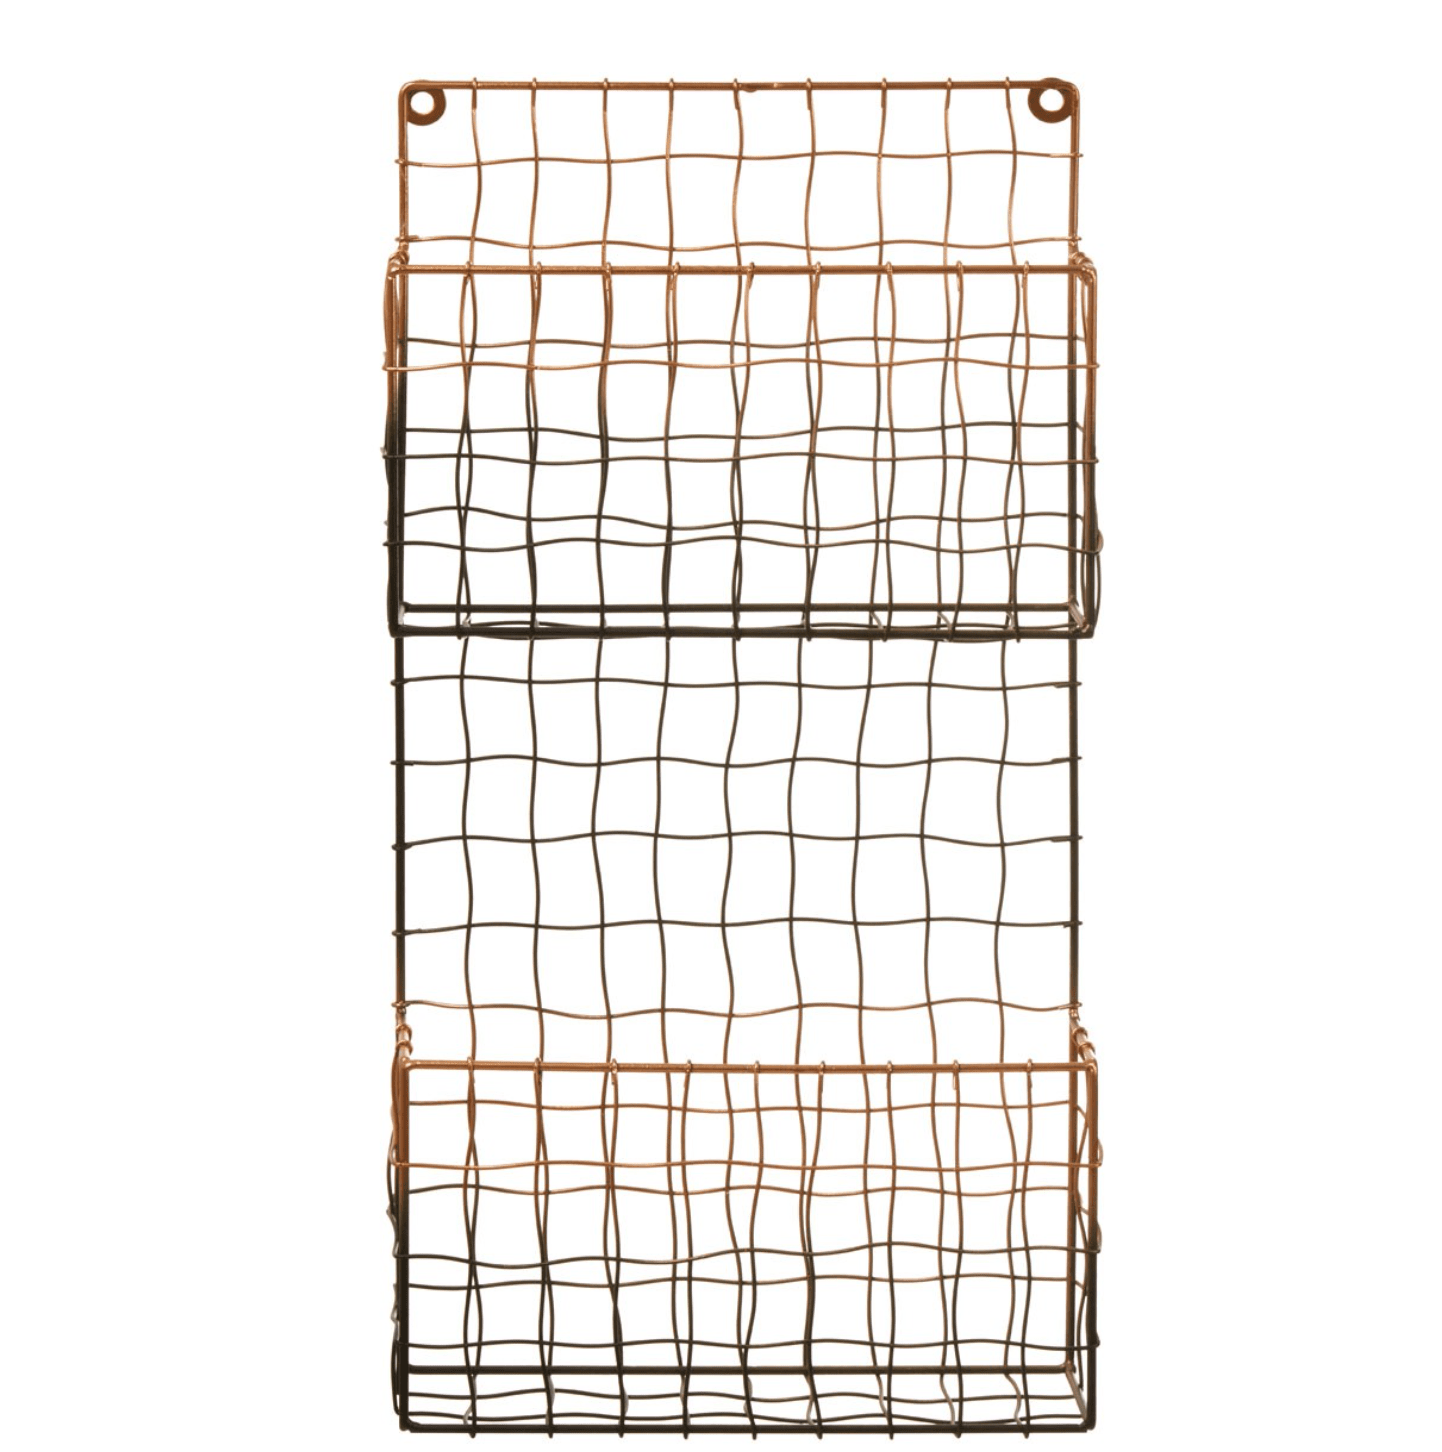 Copper And Black Metal Magazine Rack - Outlet - Save 20%